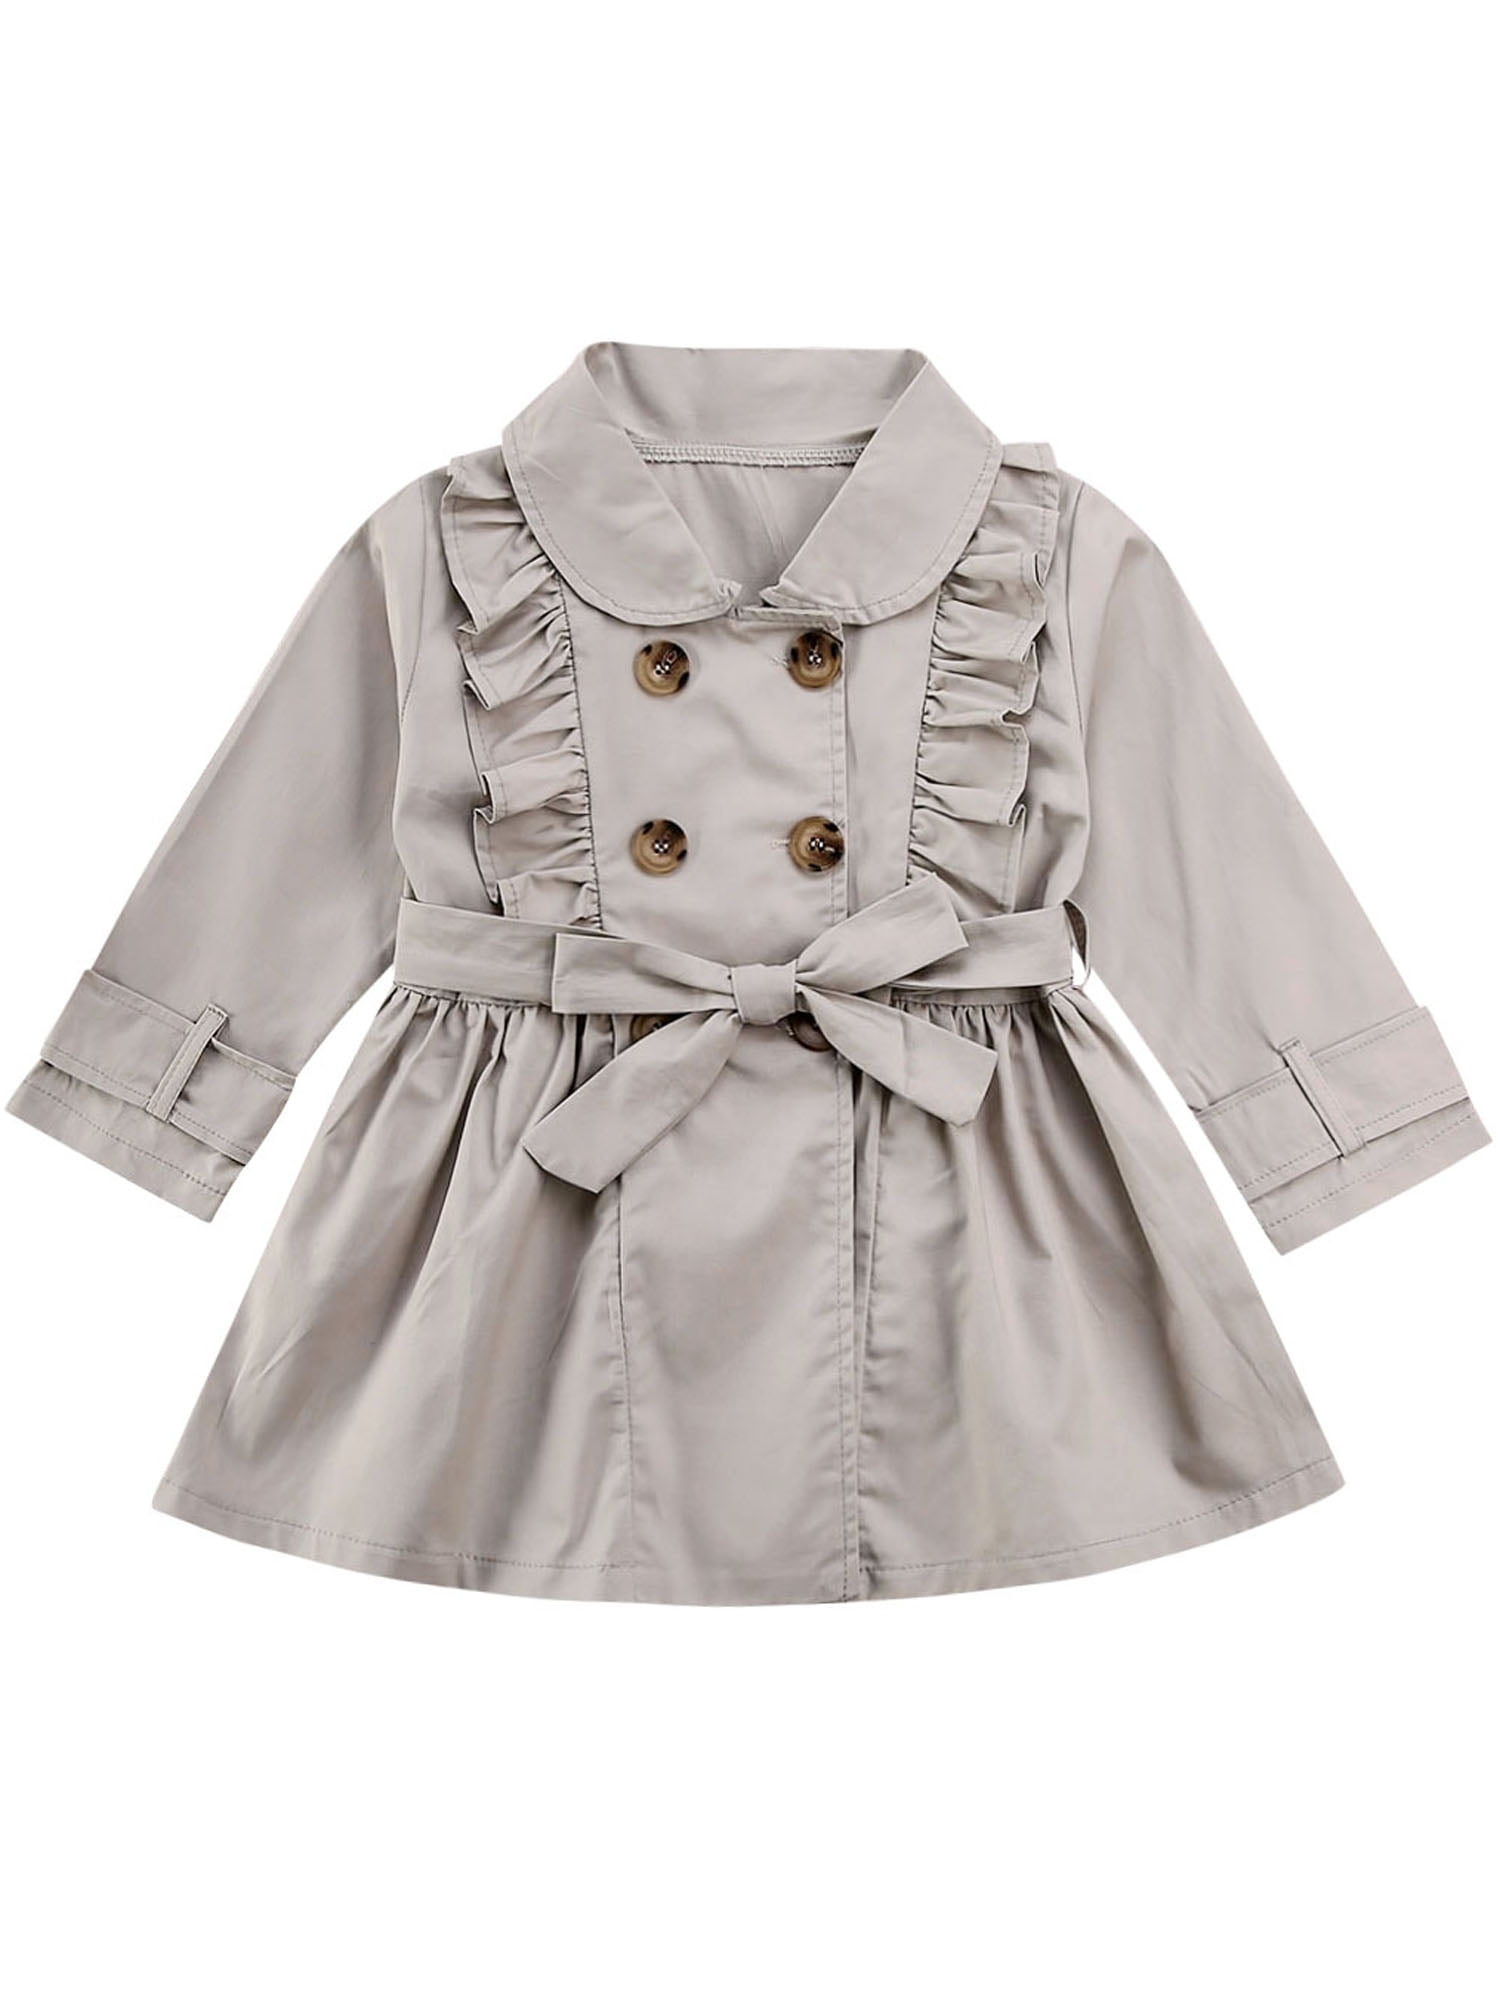 Toddler Baby Girls Bowknot Trench Coat with Belt Princess Autumn Windbreaker Jacket